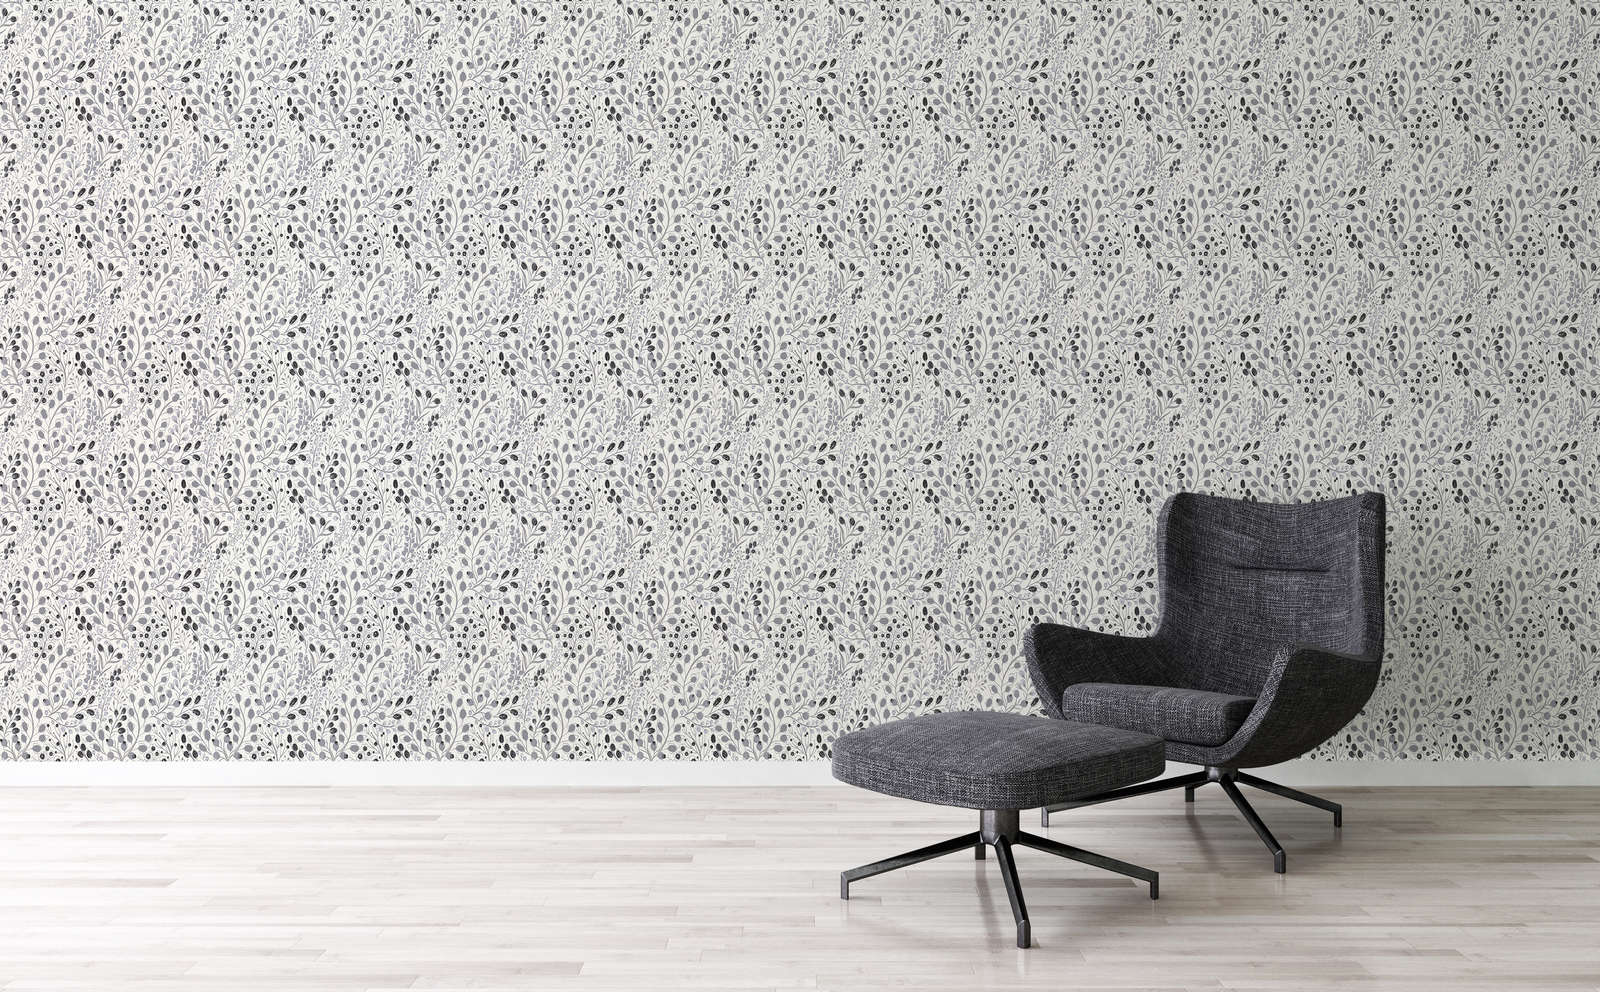             Abstract floral wallpaper in drawing style matt - grey, white, black
        